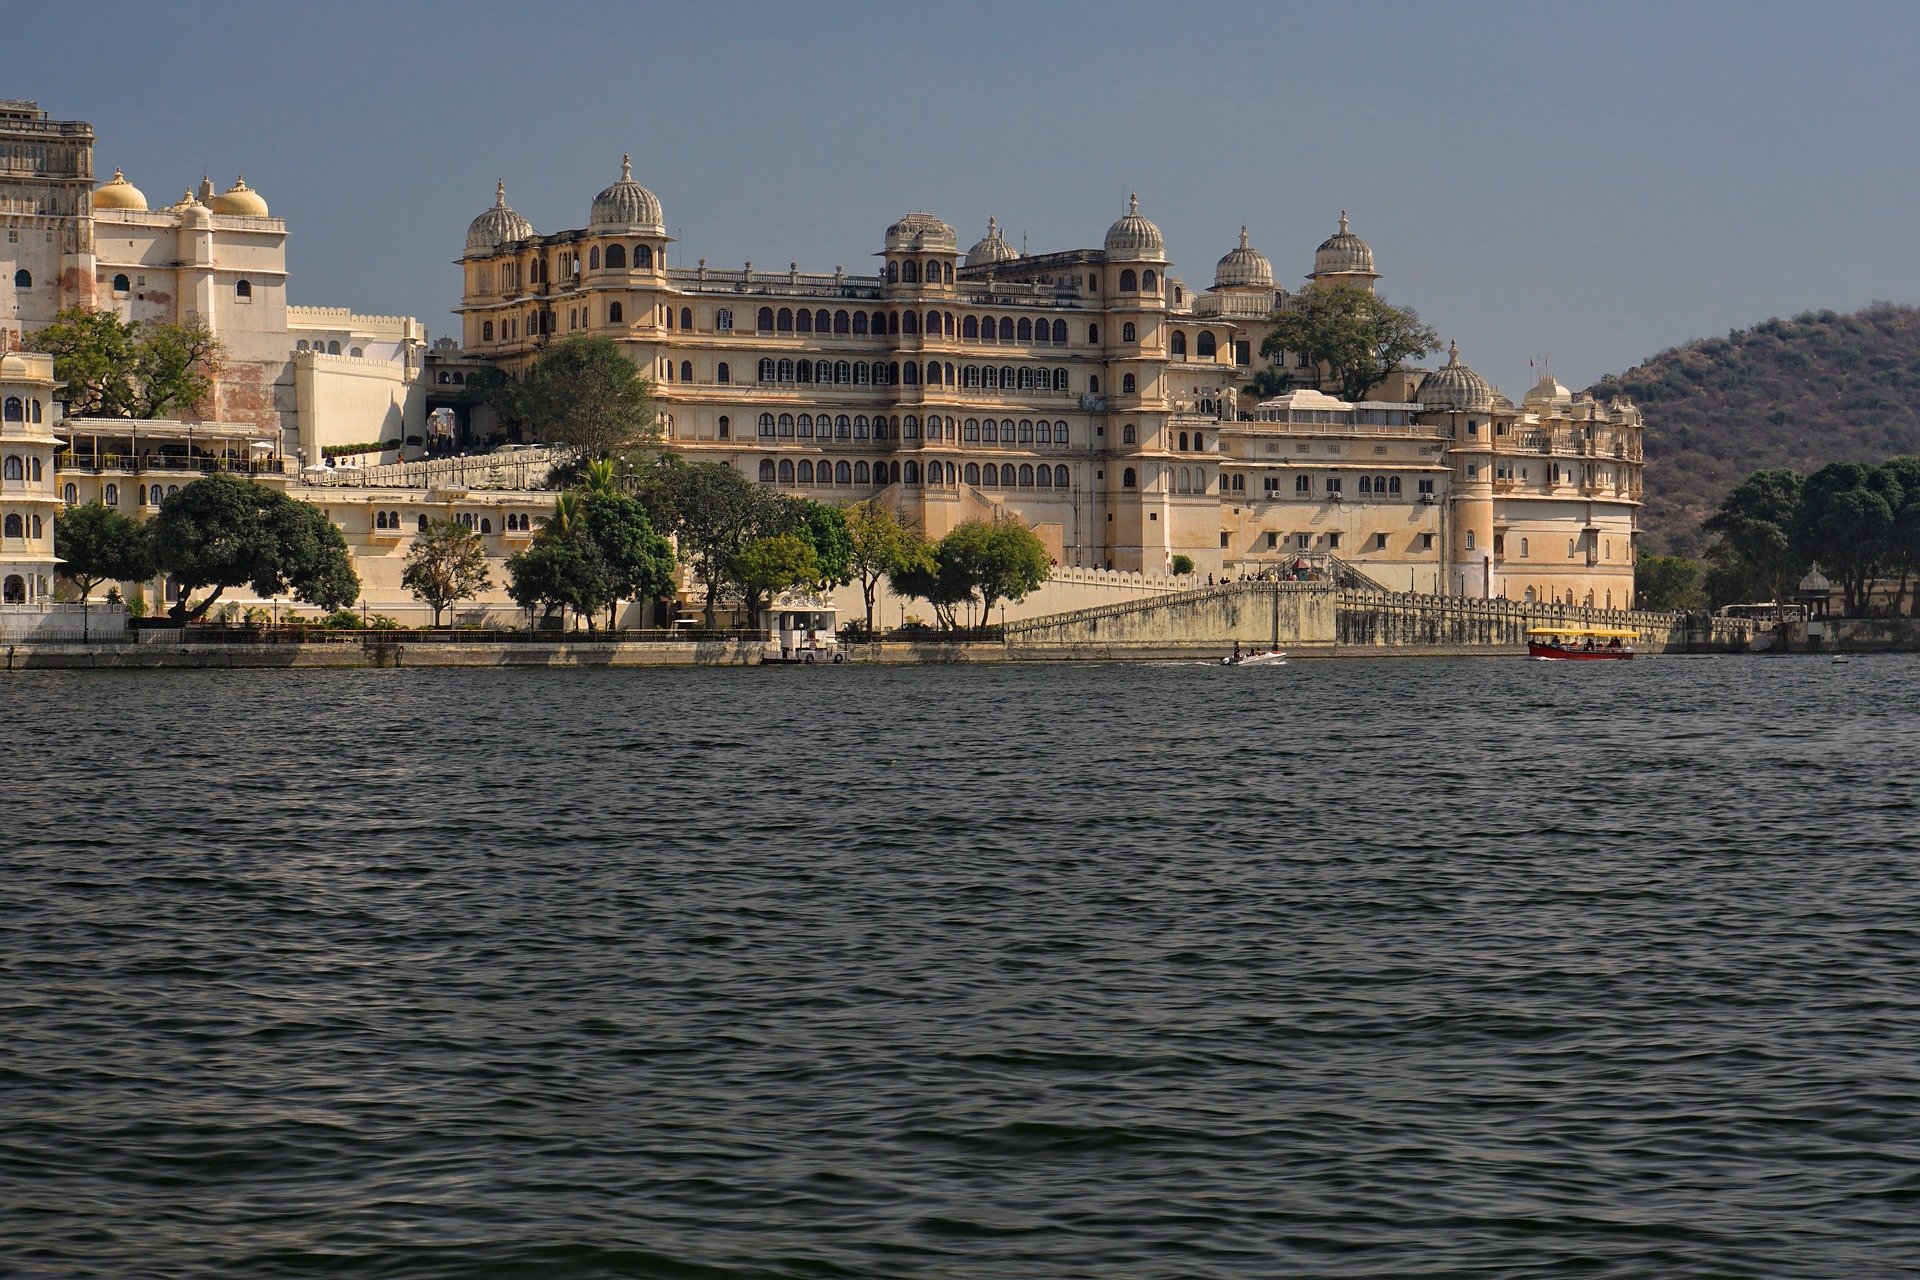 One of the best place for Honeymoon in Udaipur. It is also known as “City of lakes”. Udaipur is a wonderful place to spent a royal exotic break together. Let the allure of this captivating city make your honeymoon once in a lifetime experience. Best Experience – Palaces and Havelies, City tours, trekking, and hiking, etc. Best Time Duration – 5 to 7 days Best time to visit – October to March